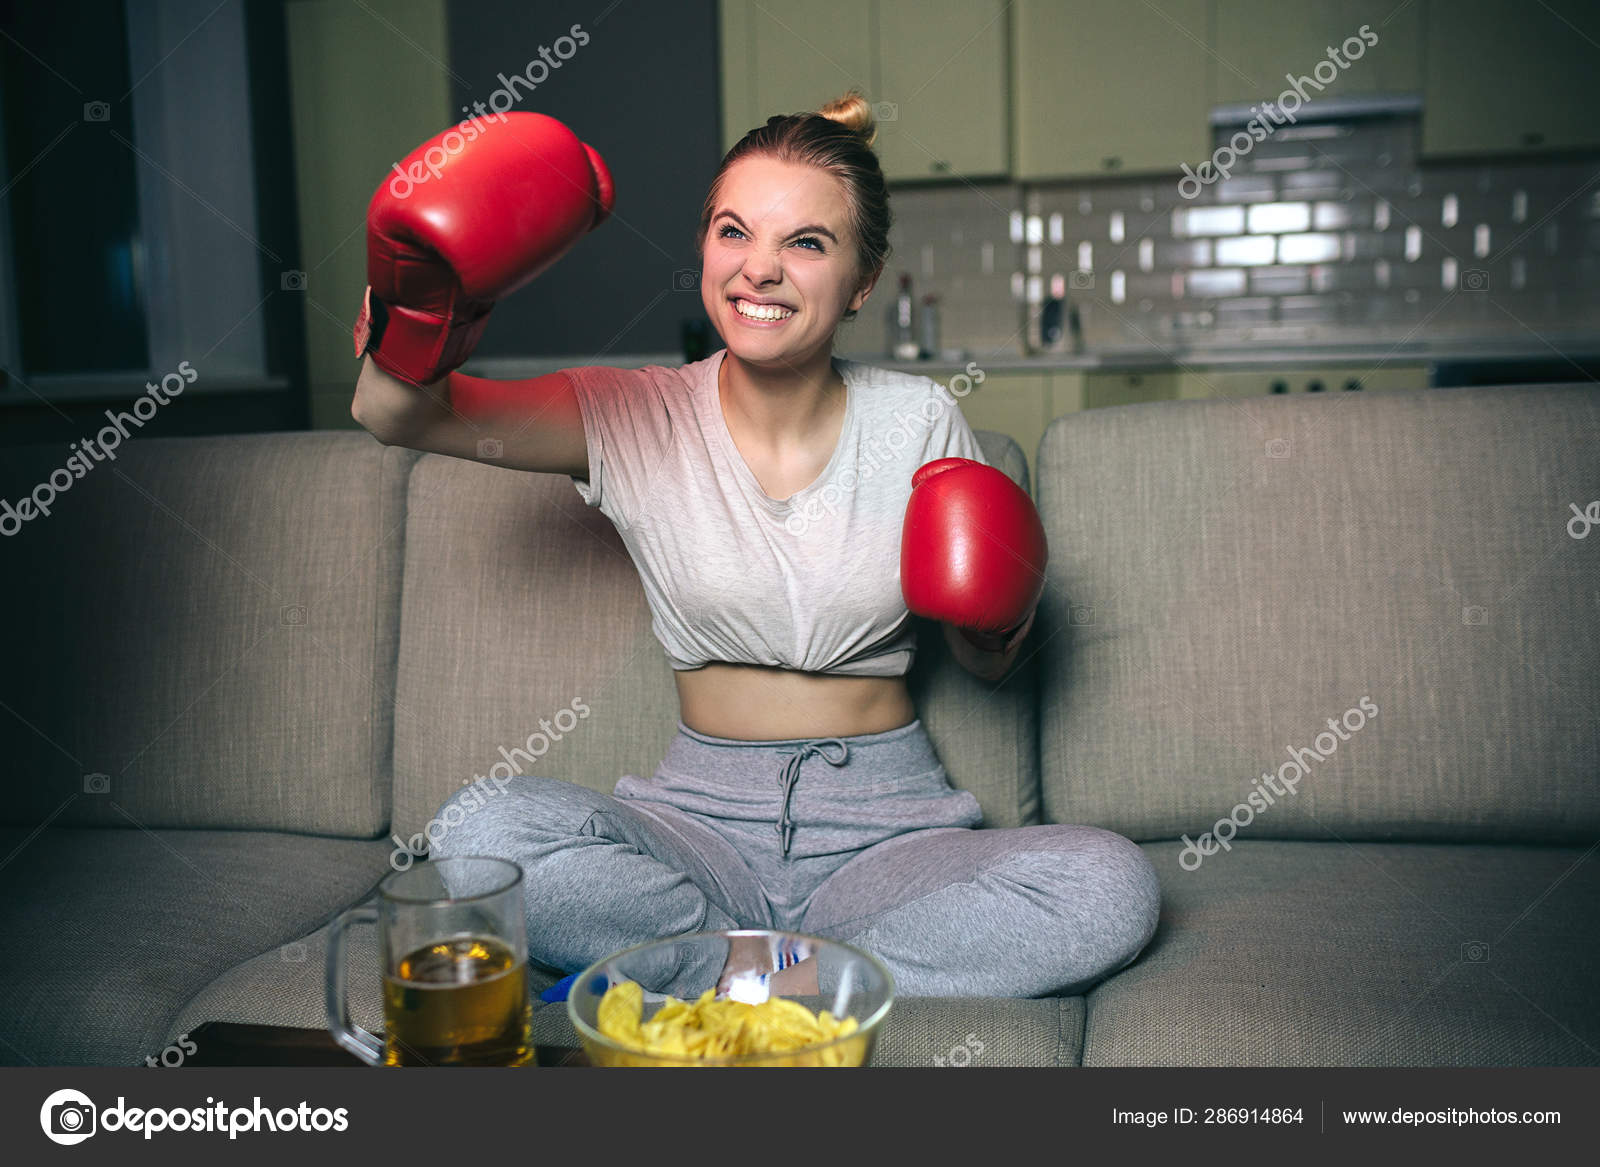 Young woman watch boxing on tv at night. Emotional blonde model cheering and wave with hands in red boxing gloves. Watching streaming show